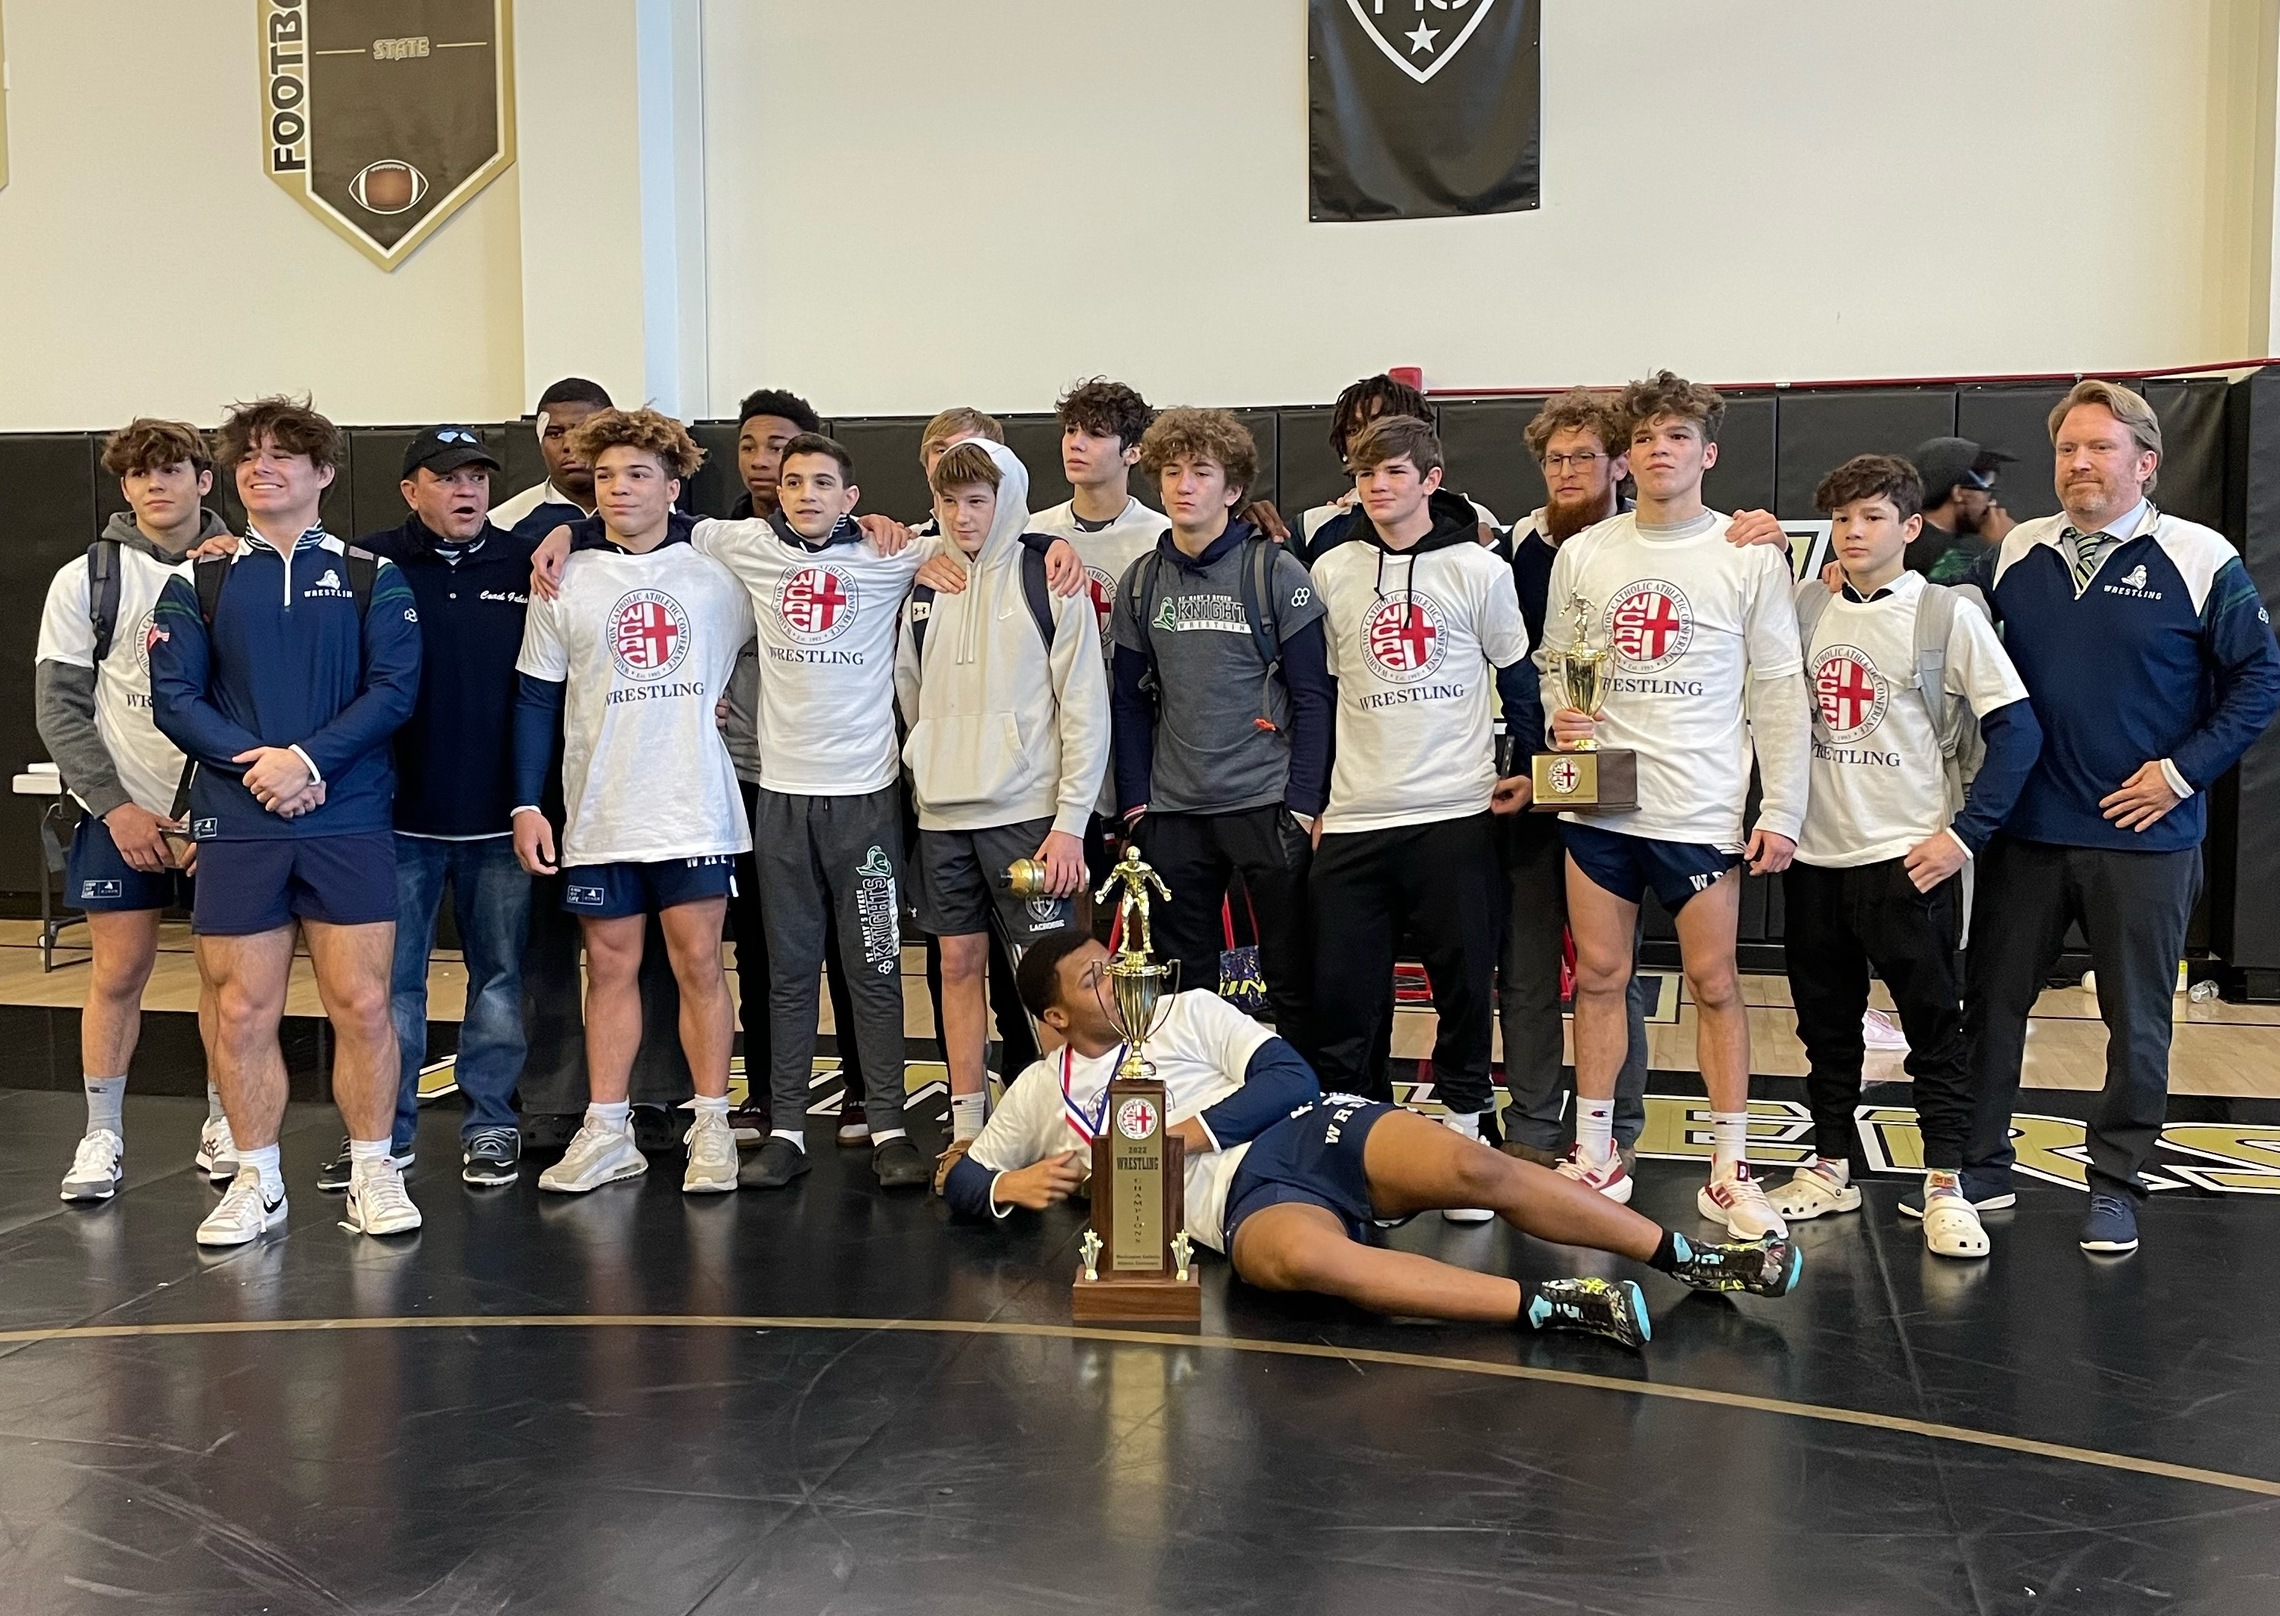 St. Mary’s Ryken dominates WCAC wrestling championships, beating field by more than 100 points